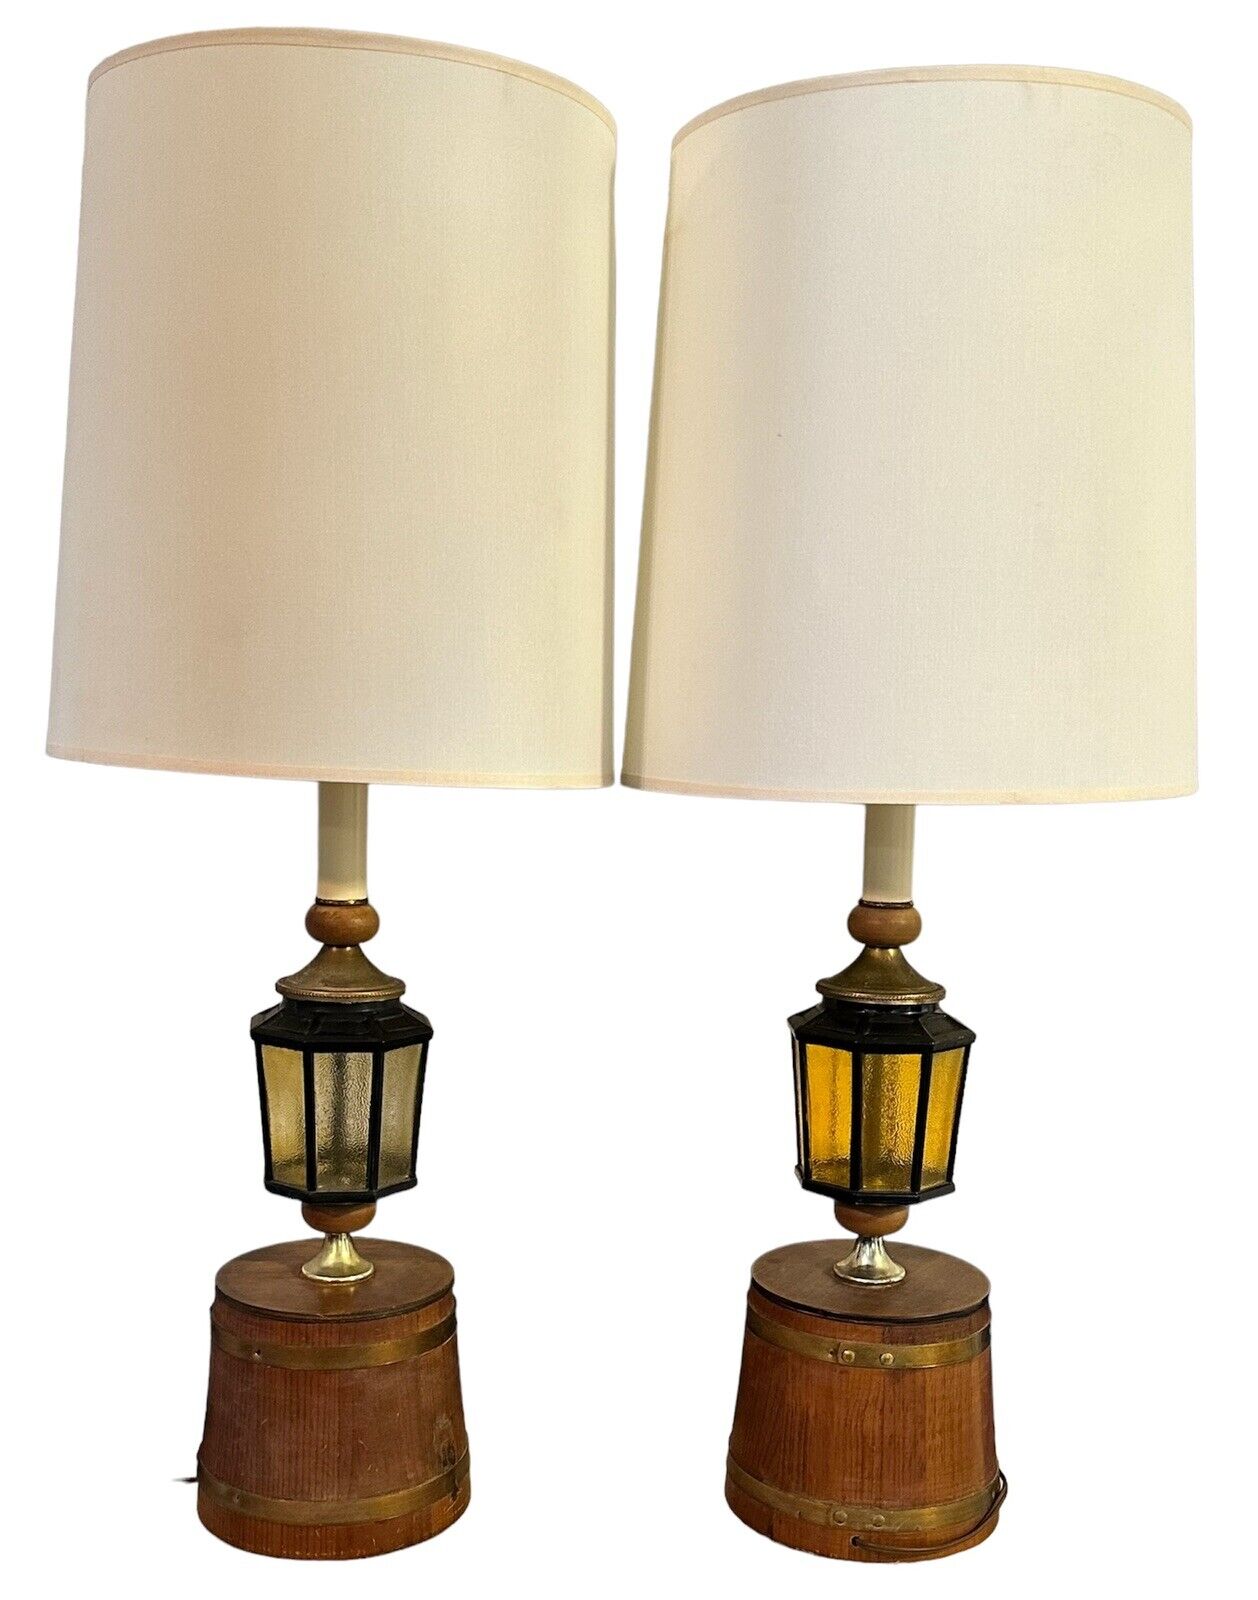 RARE Pair of Vintage 1960s Wood & Amber Color Glass Lamps - Carriage House